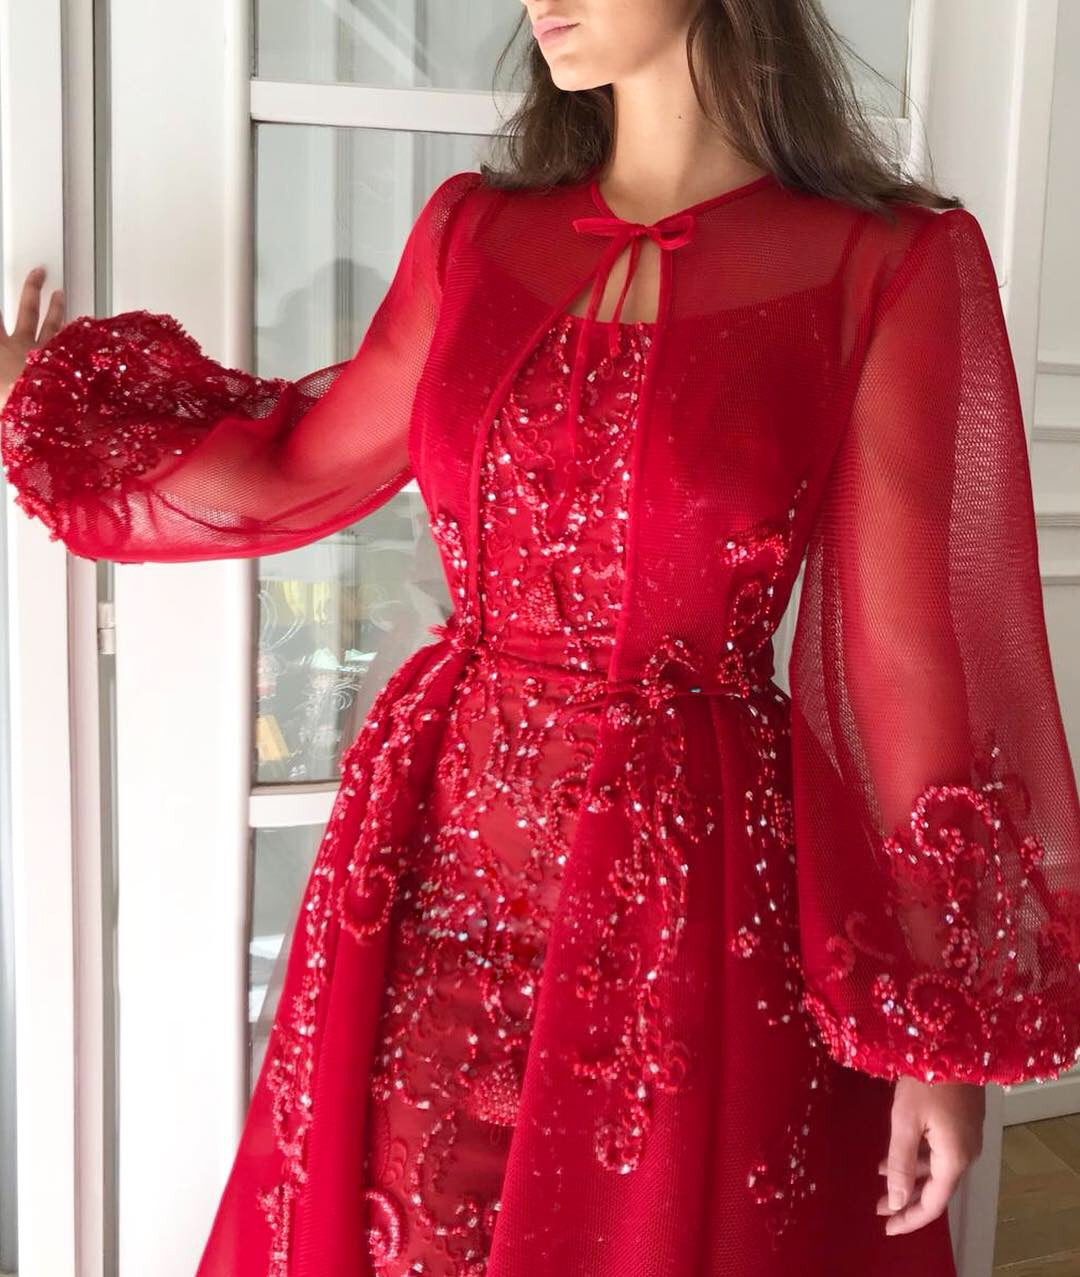 Red overskirt dress with long sleeves and embroidery